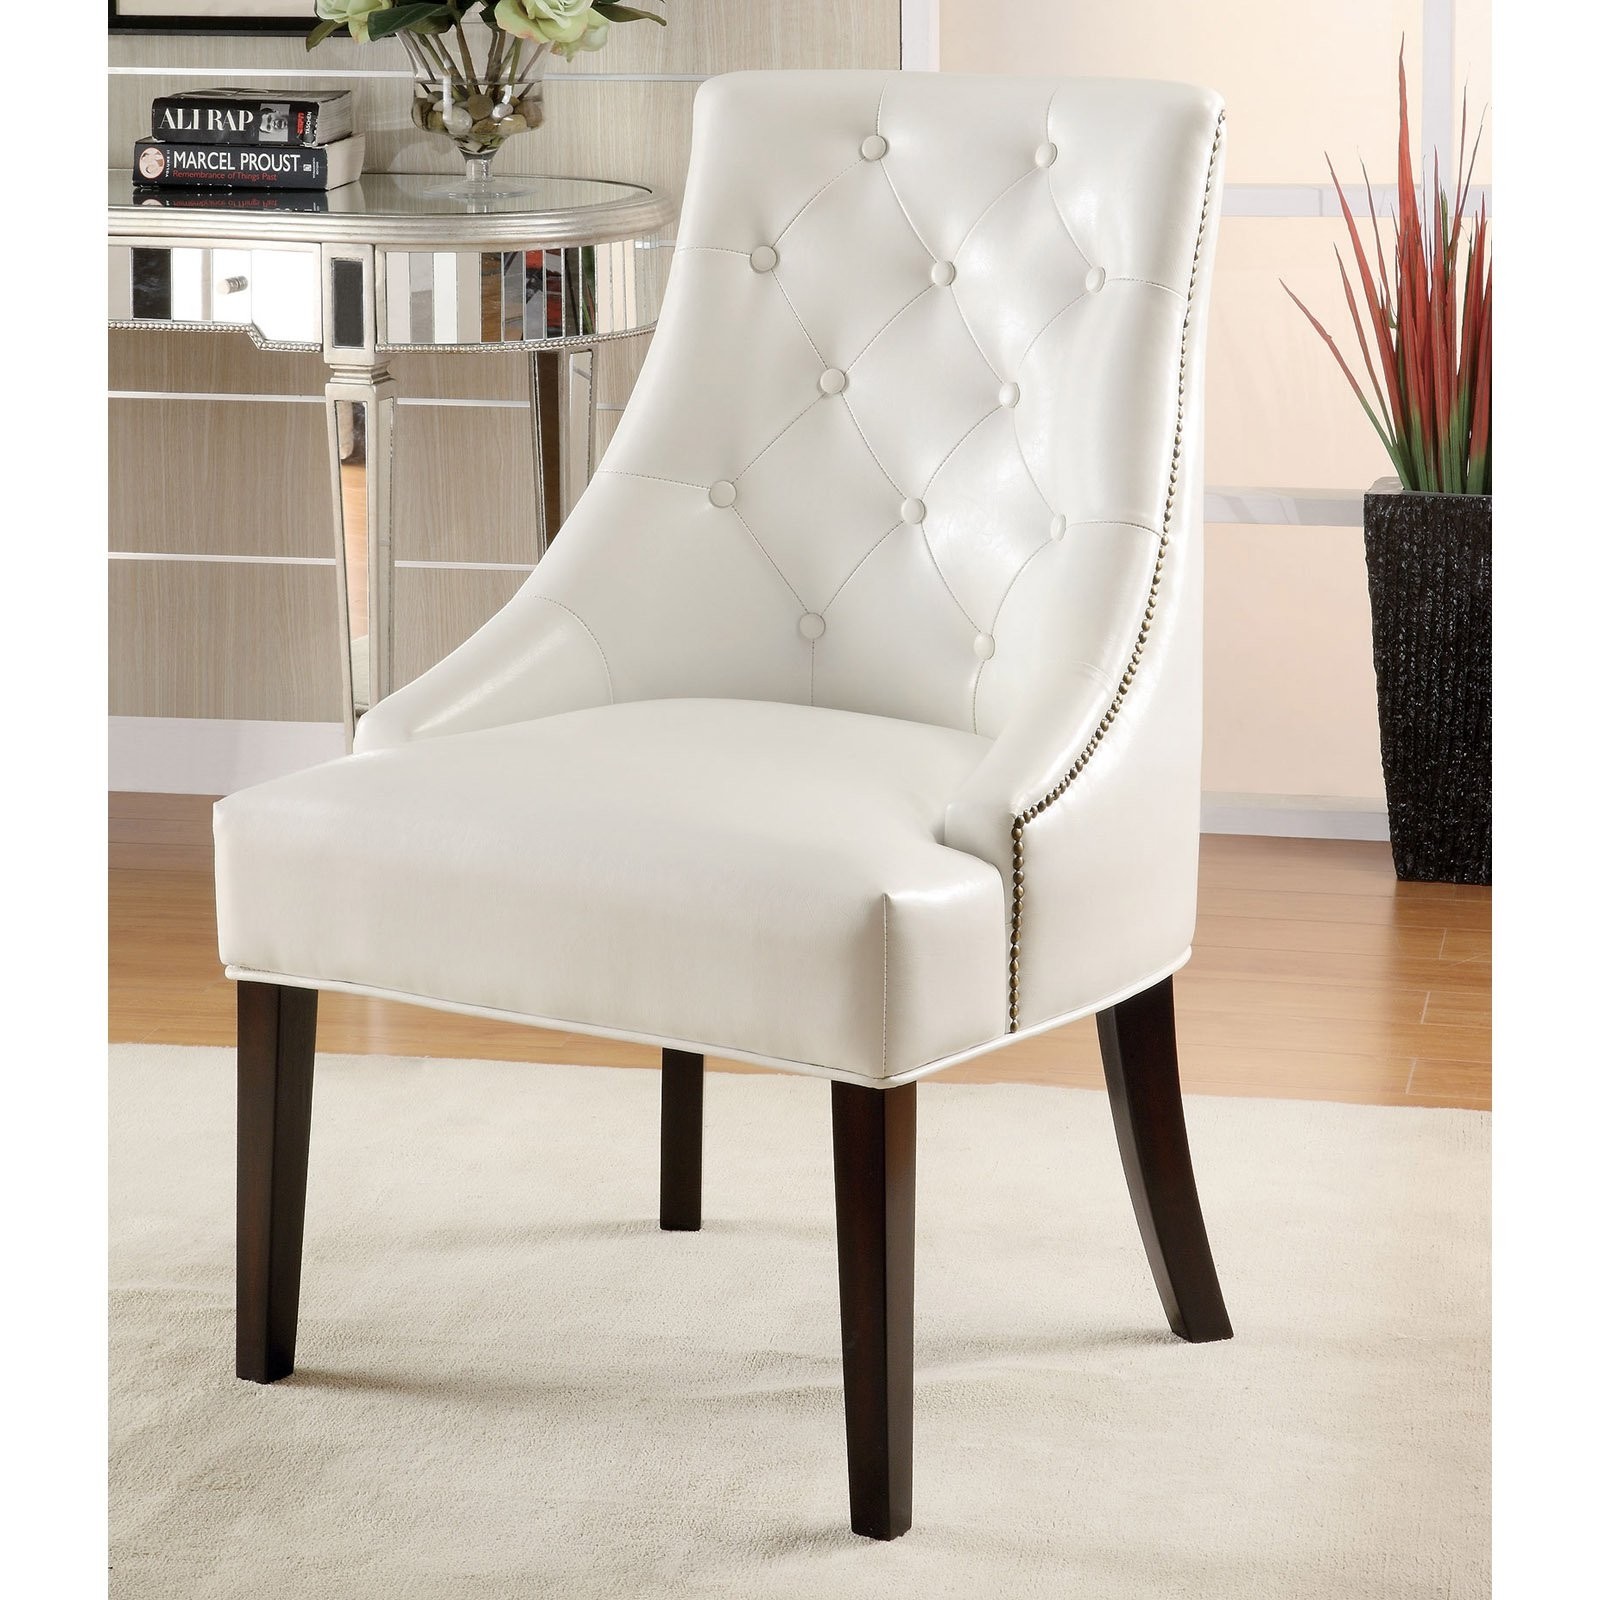 Coaster Leather Like Lounge Chair in White Finish